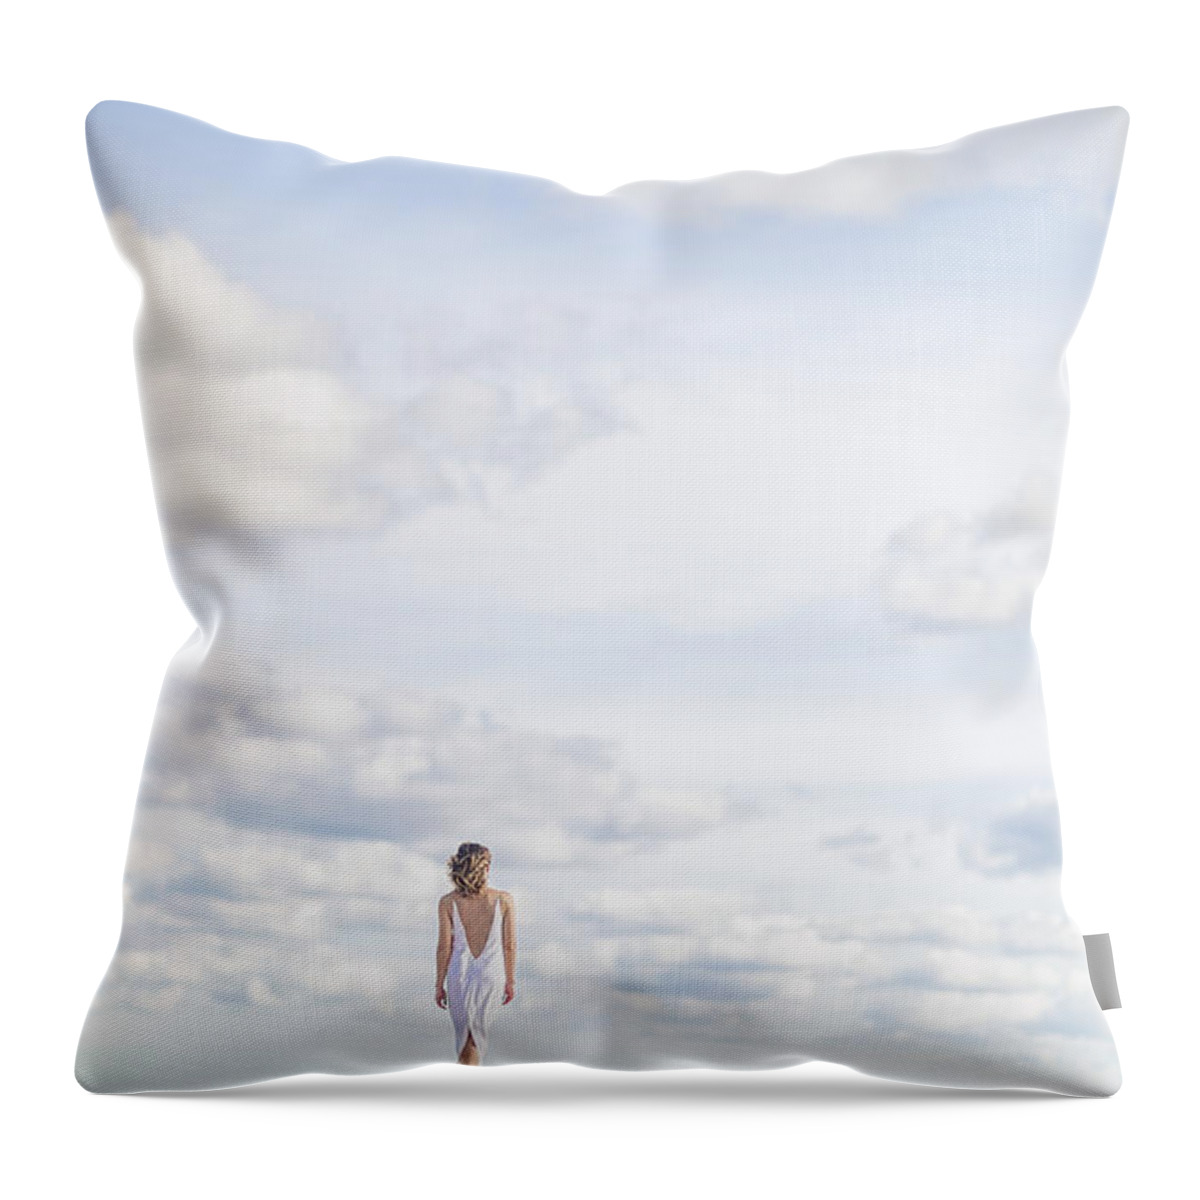 Kremsdorf Throw Pillow featuring the photograph Endlessly by Evelina Kremsdorf